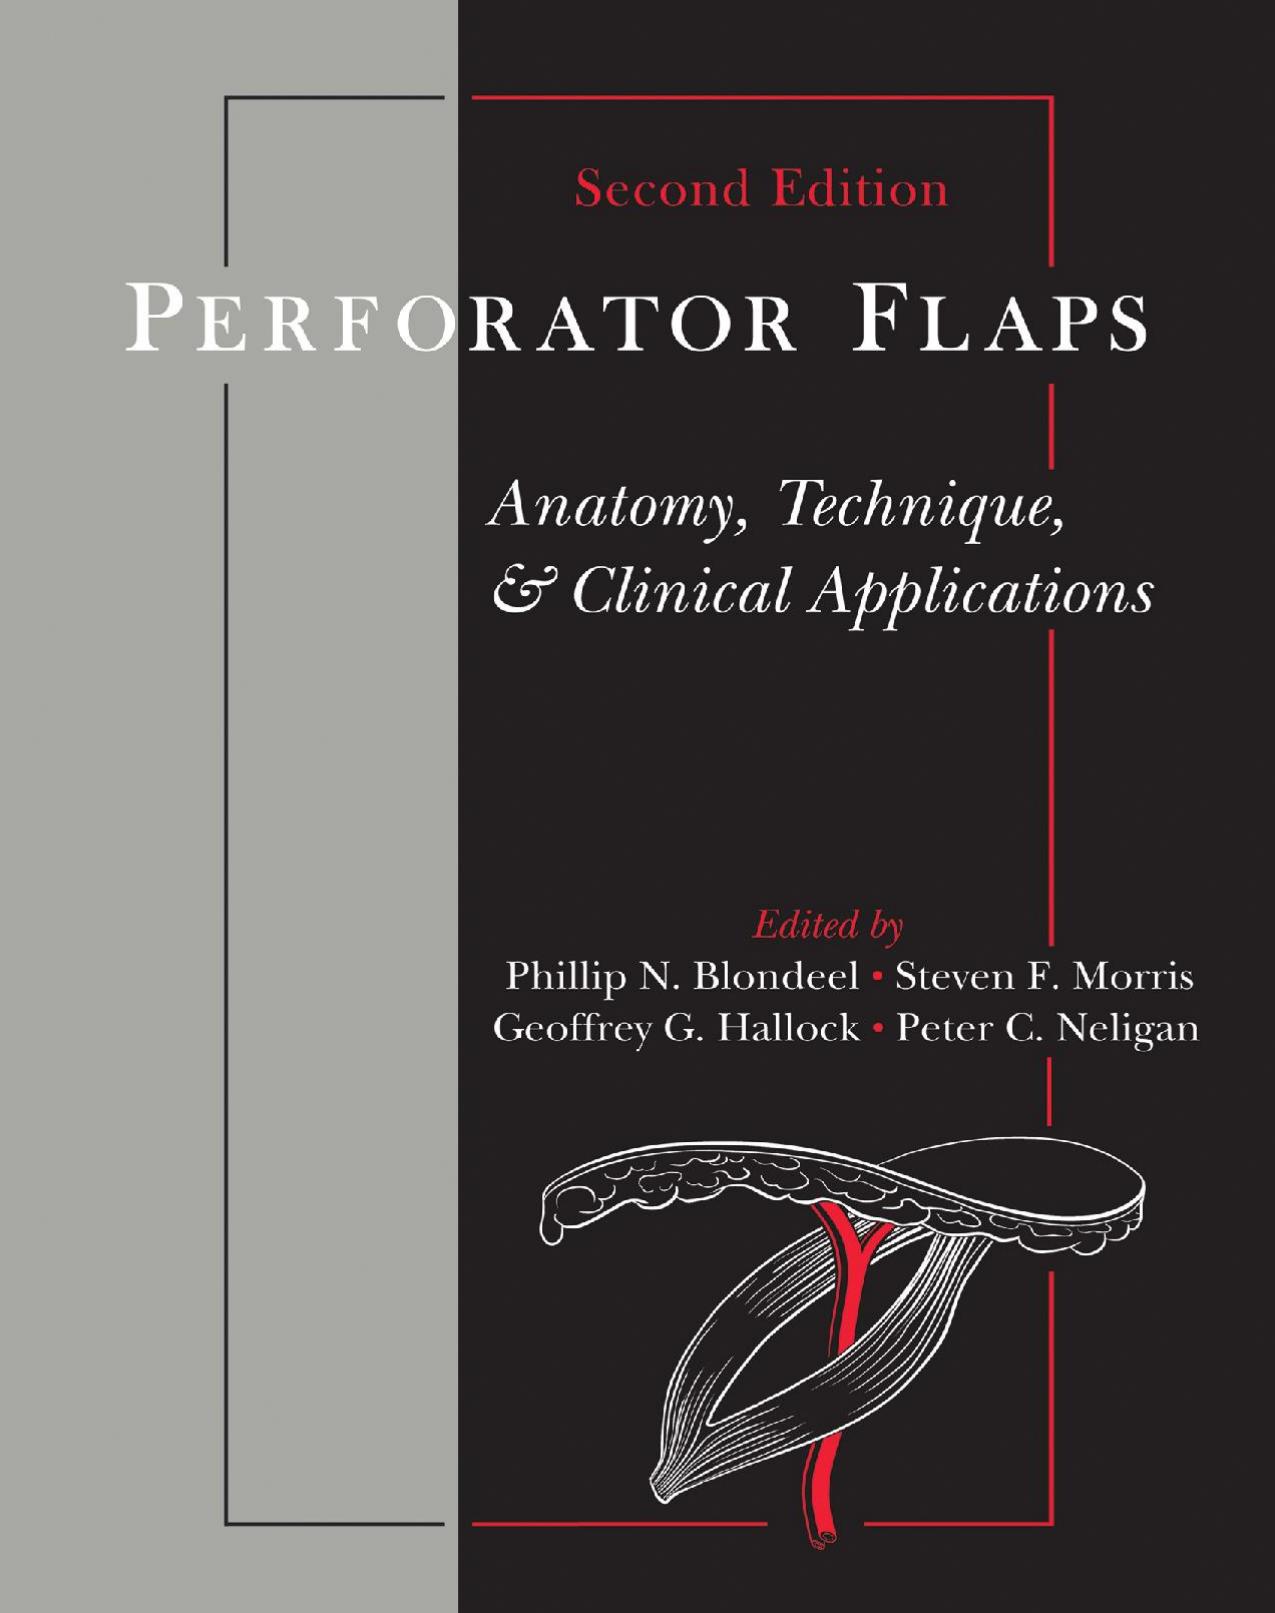 Perforator Flaps (Anatomy, Technique, & Clinical Applications) 2nd Edition by  Phillip N. Blondeel